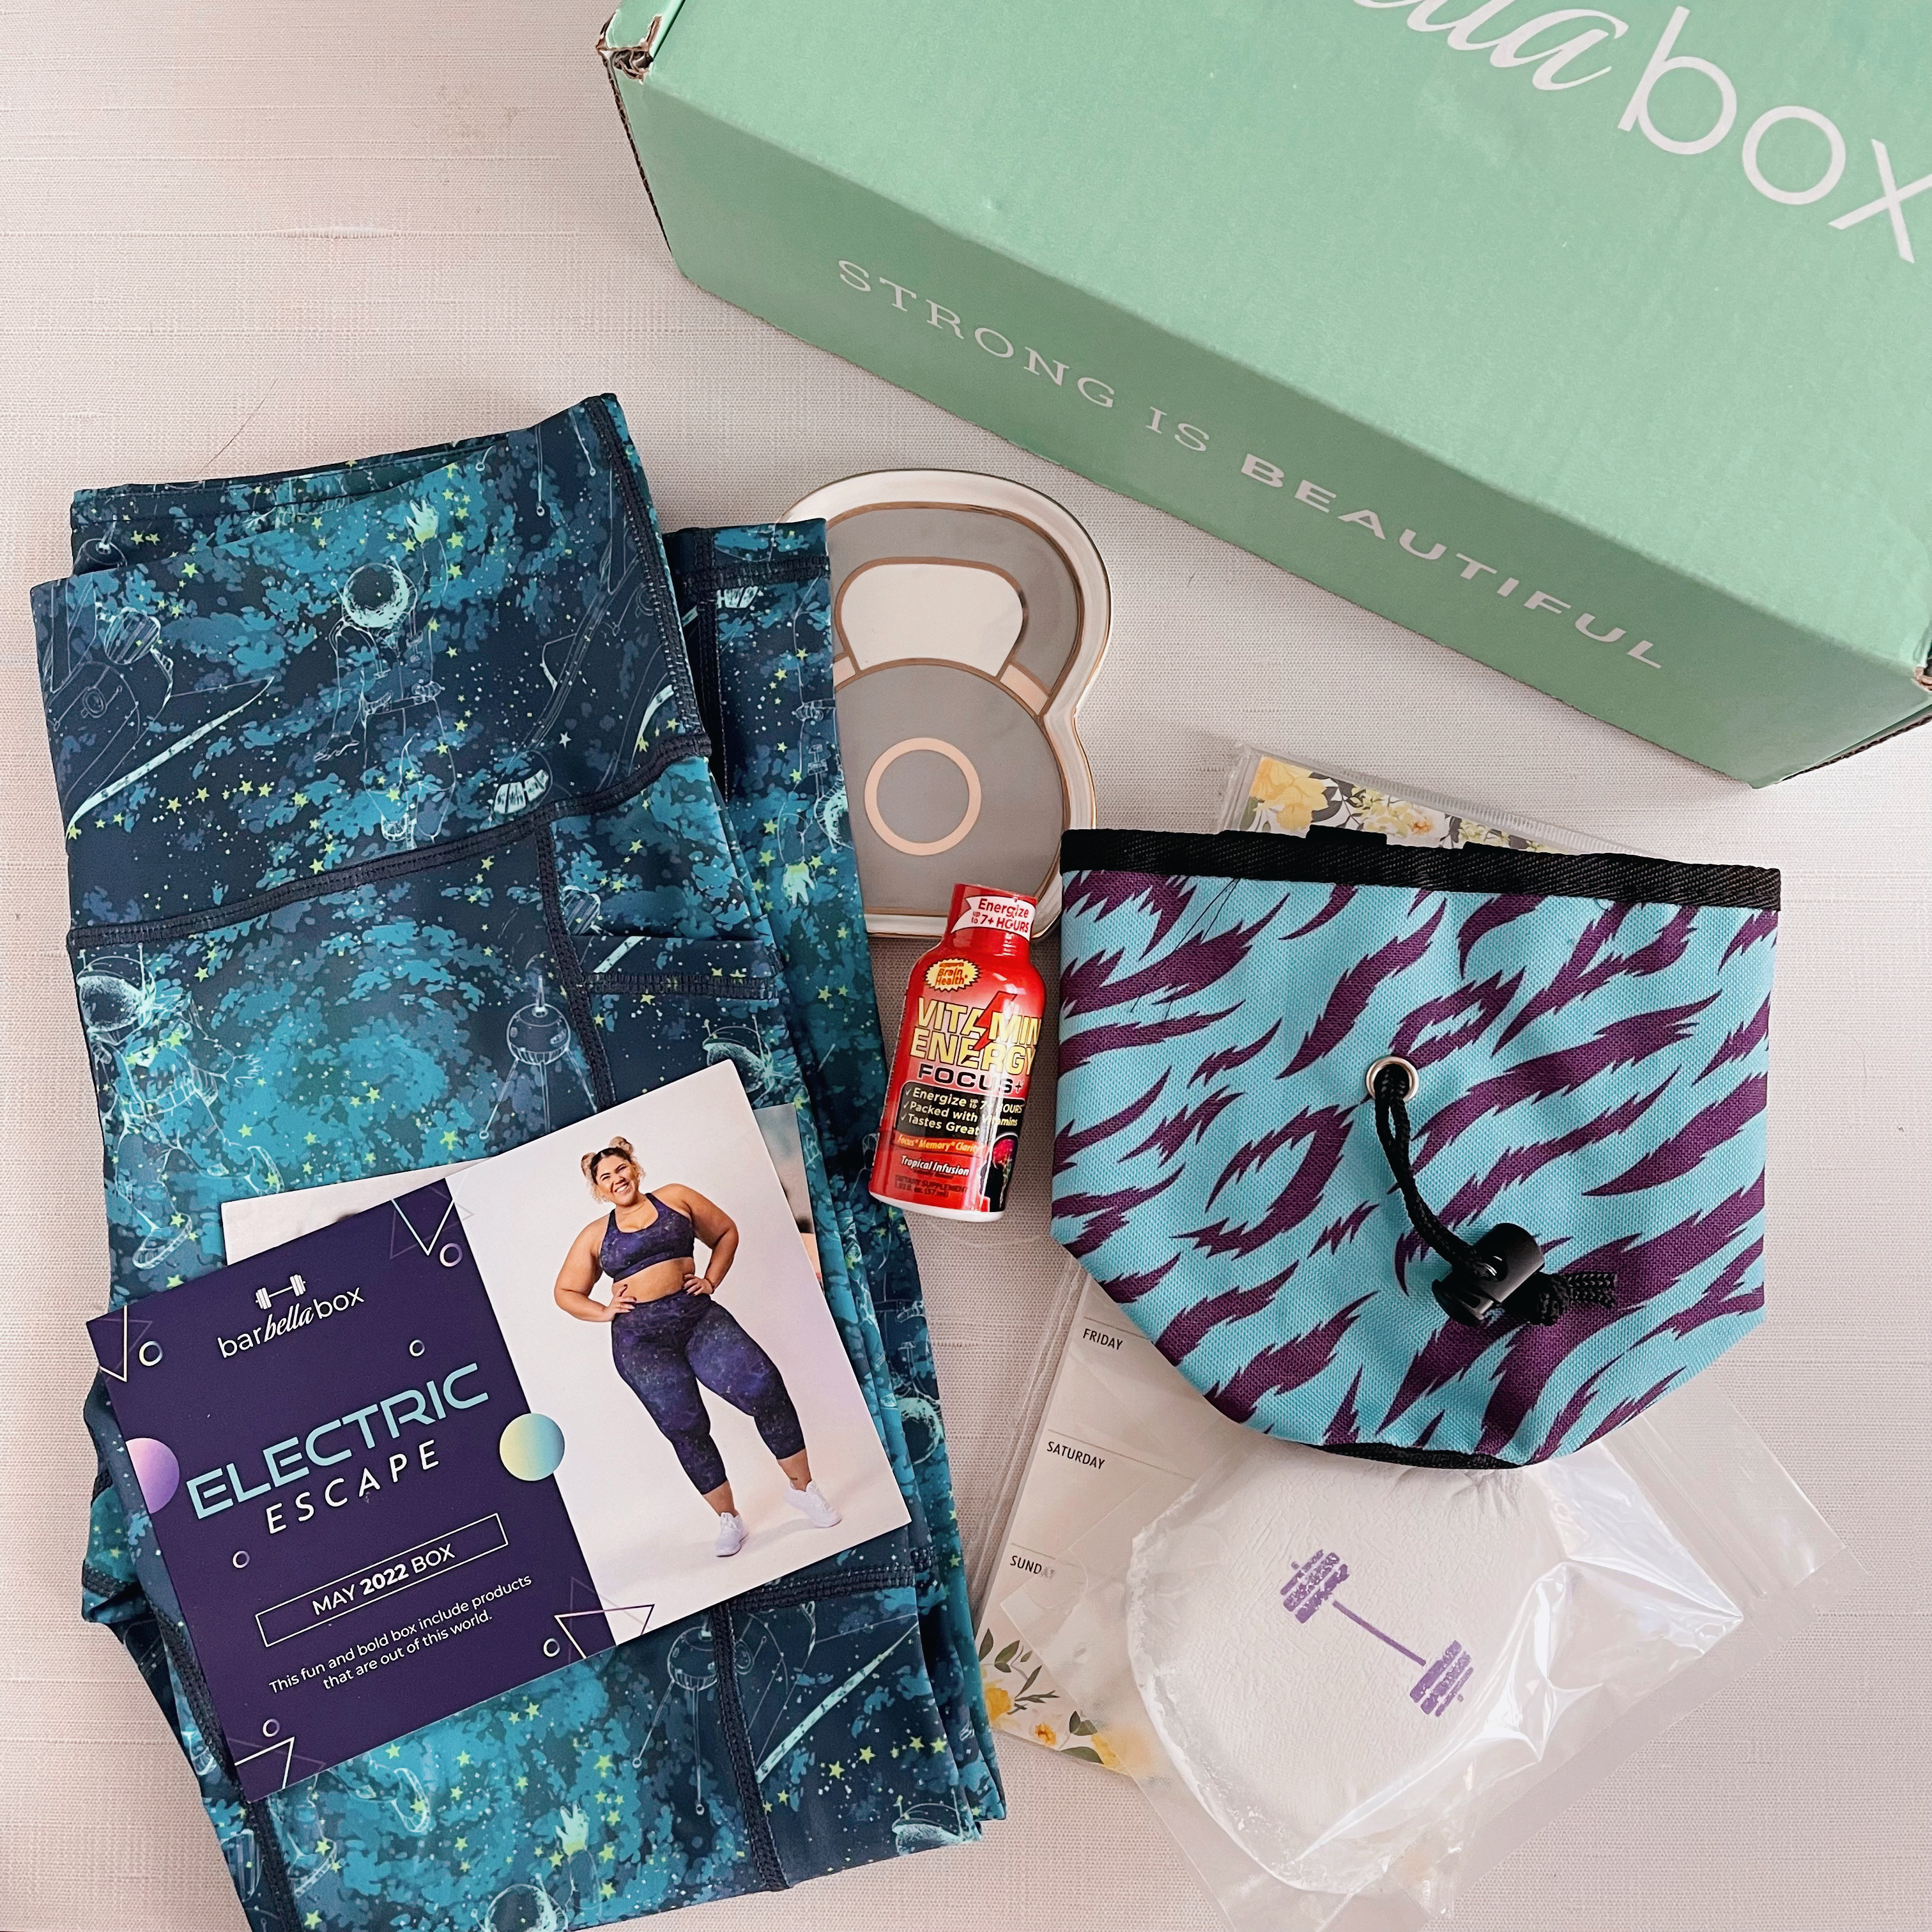 My Favorite Fitness Subscription Box